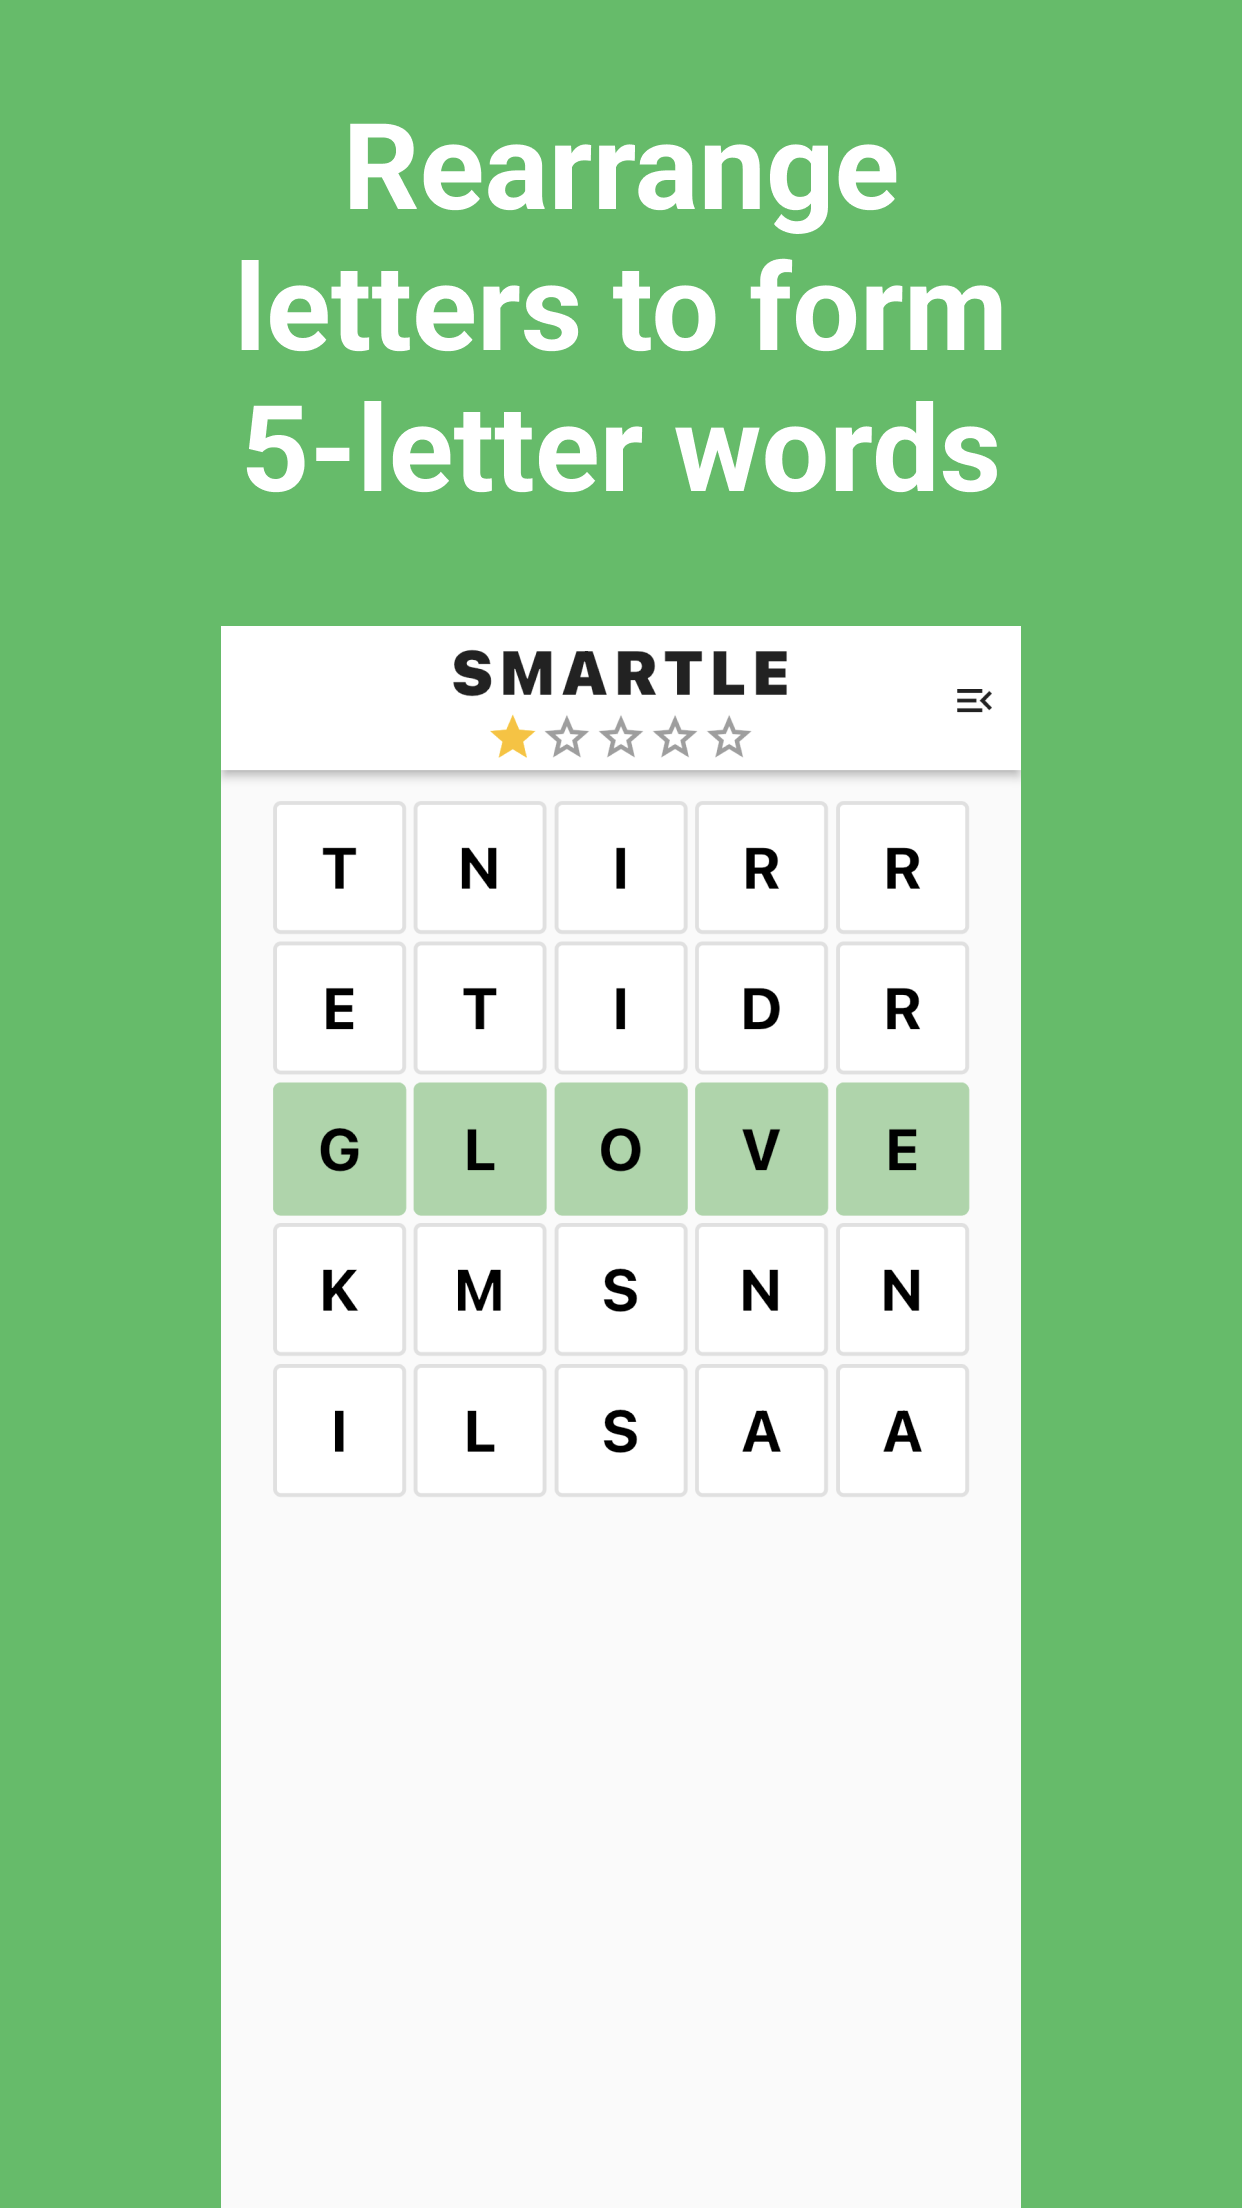 Word Puzzle Game Play - Apps on Google Play